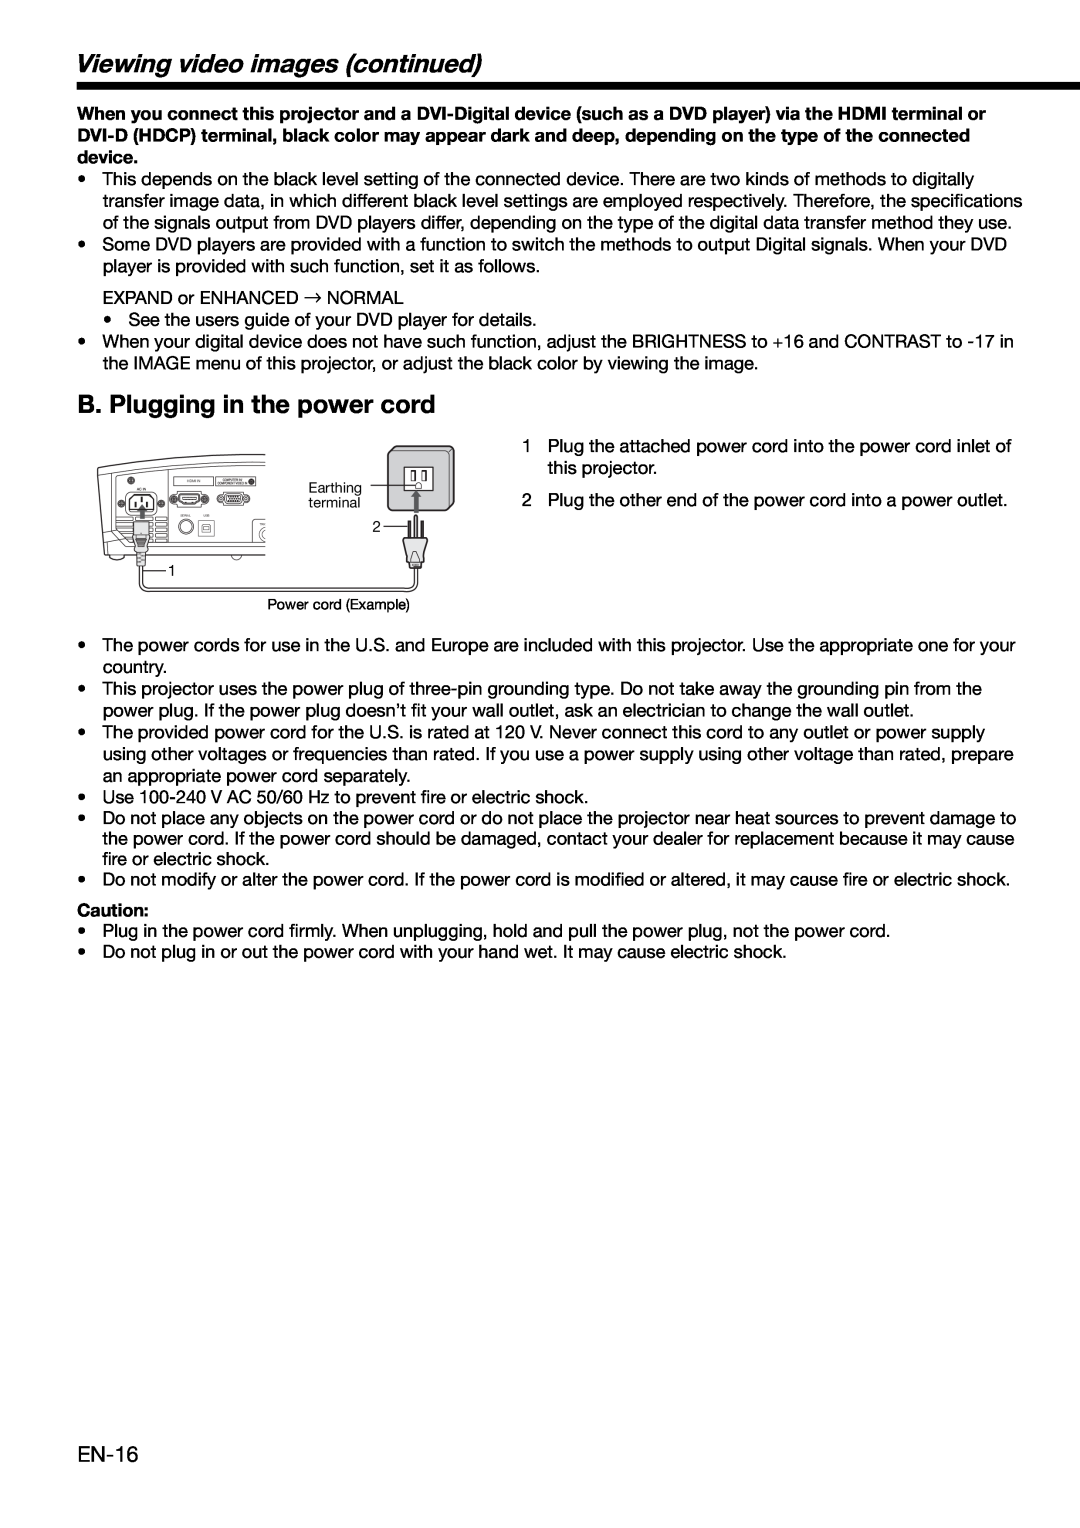 Mitsubishi Electronics HC3000 user manual B. Plugging in the power cord, Viewing video images continued, EN-16 